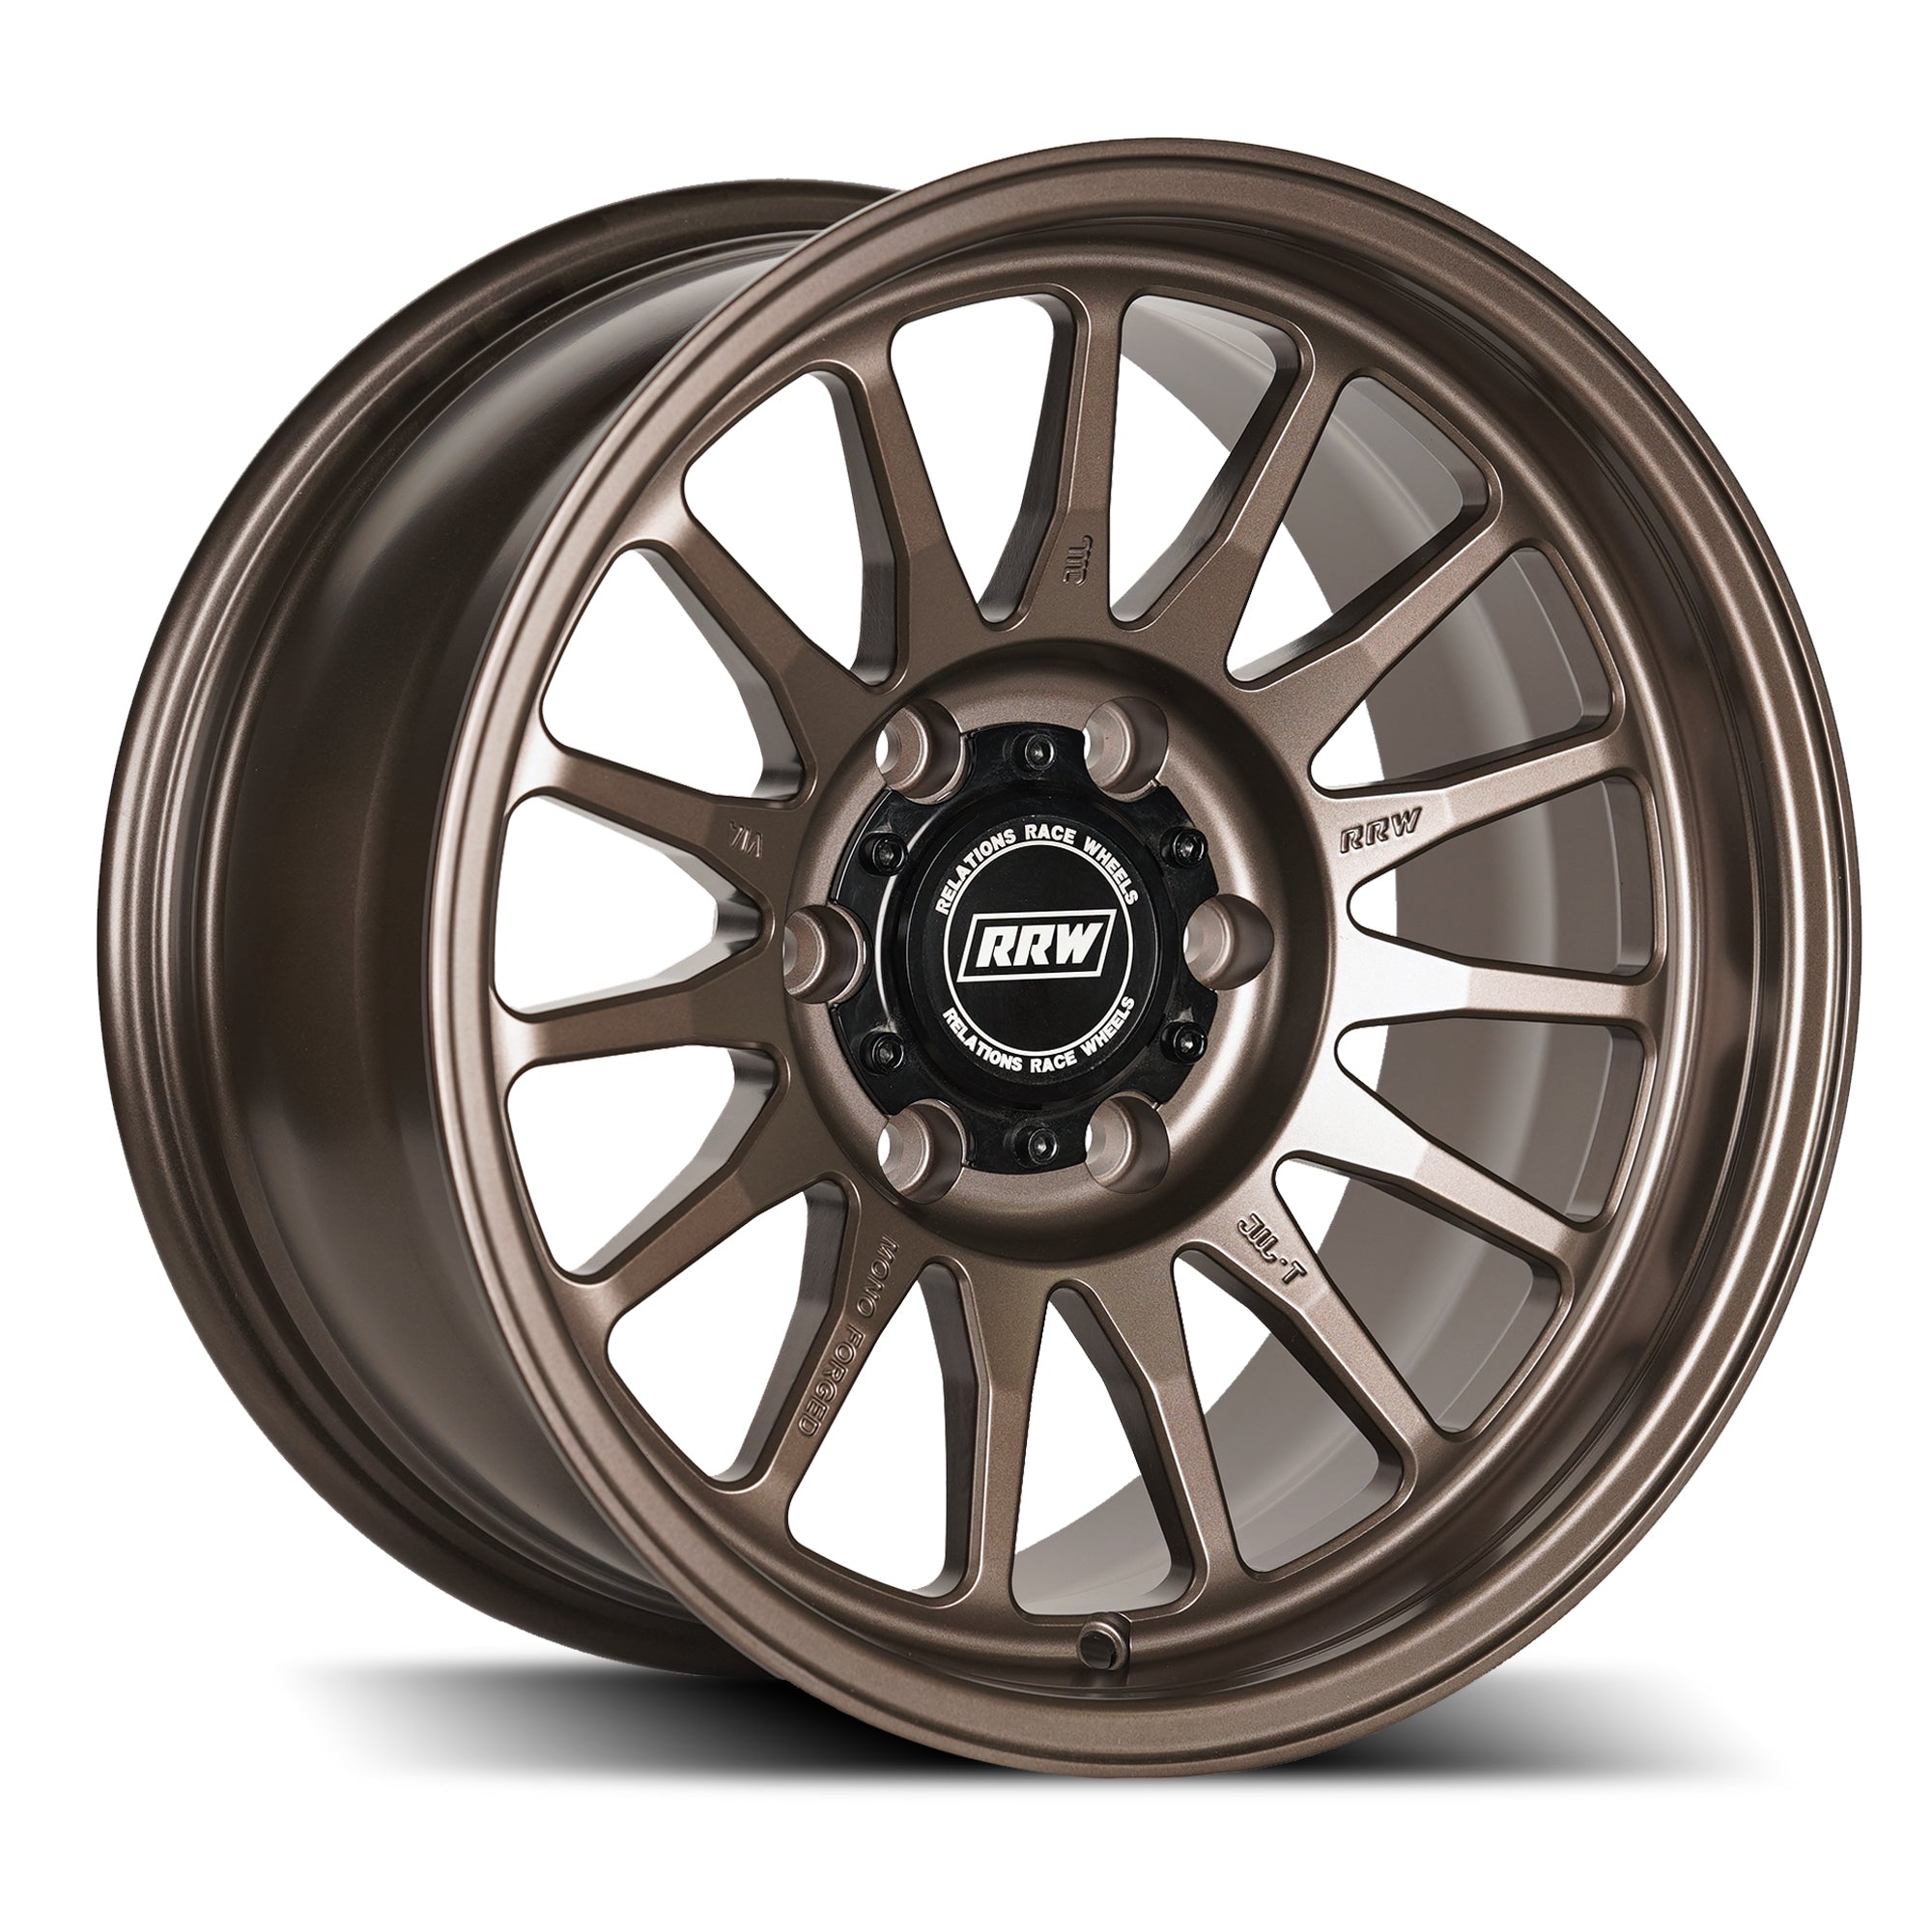 Pre-Order: RS7-S 17x8.5 and 18x8.5 MonoForged Wheel